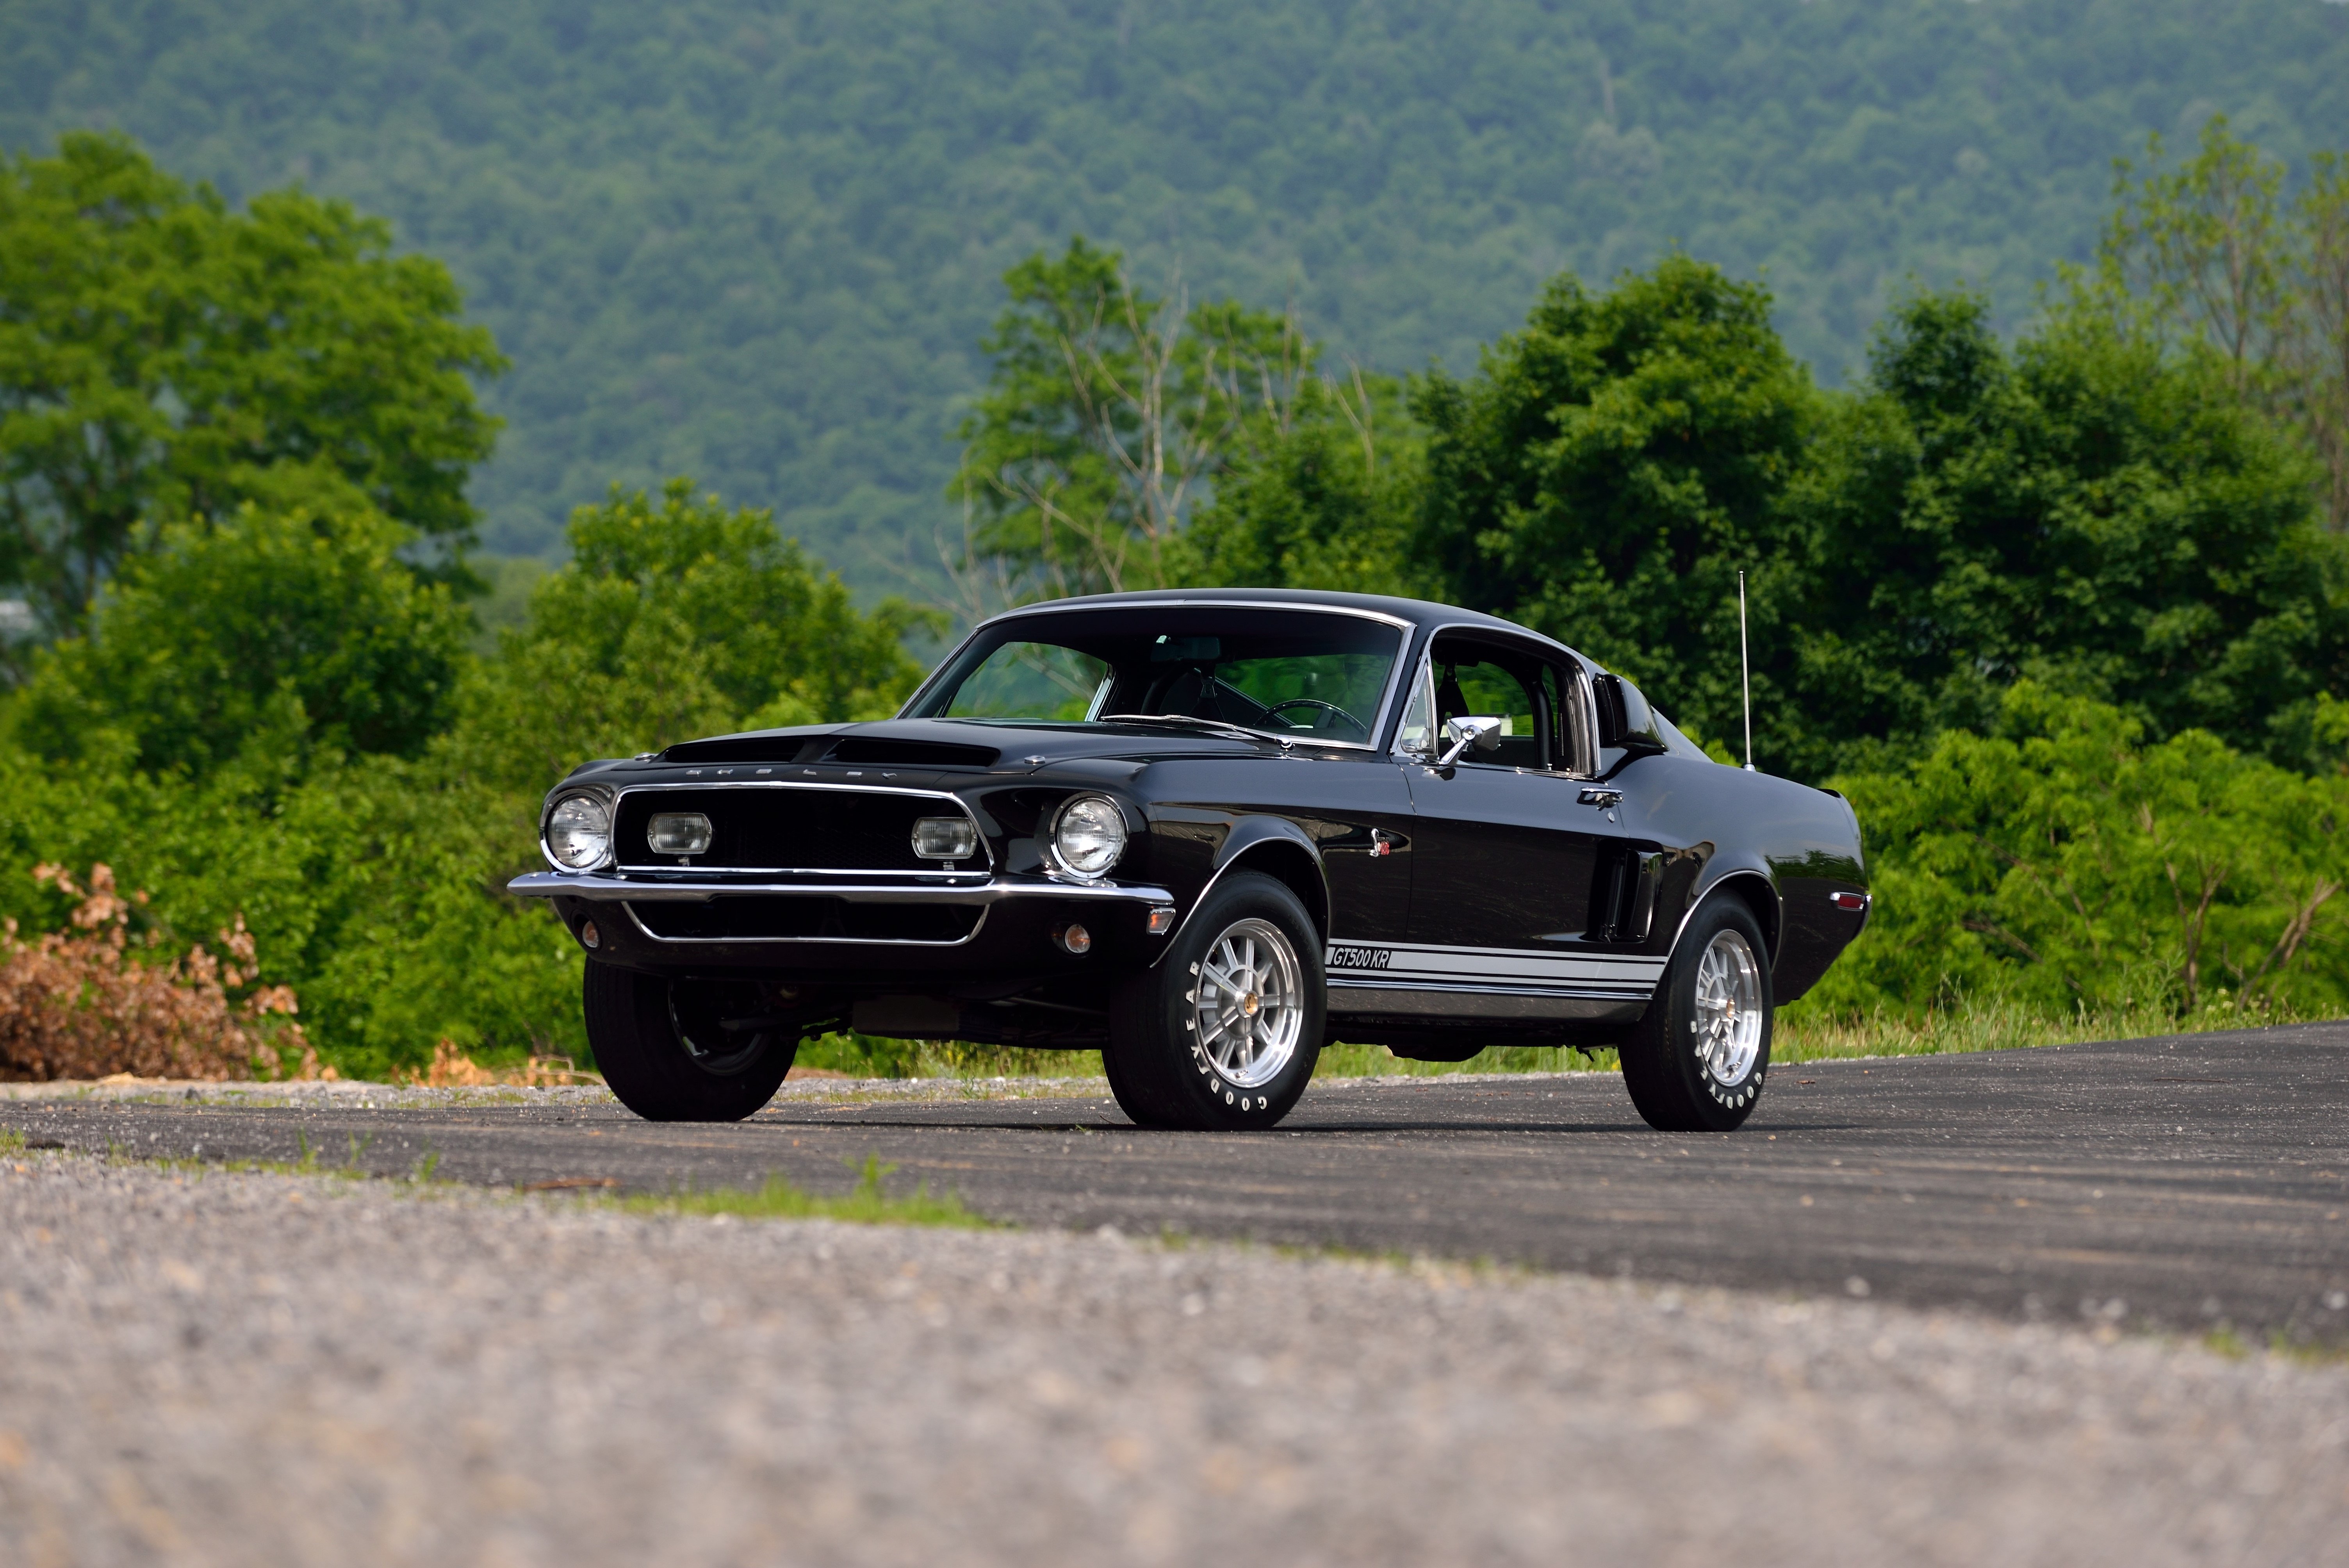 1968 Ford Mustang Shelby Gt500 Kr Fastback Muscle Classic Old